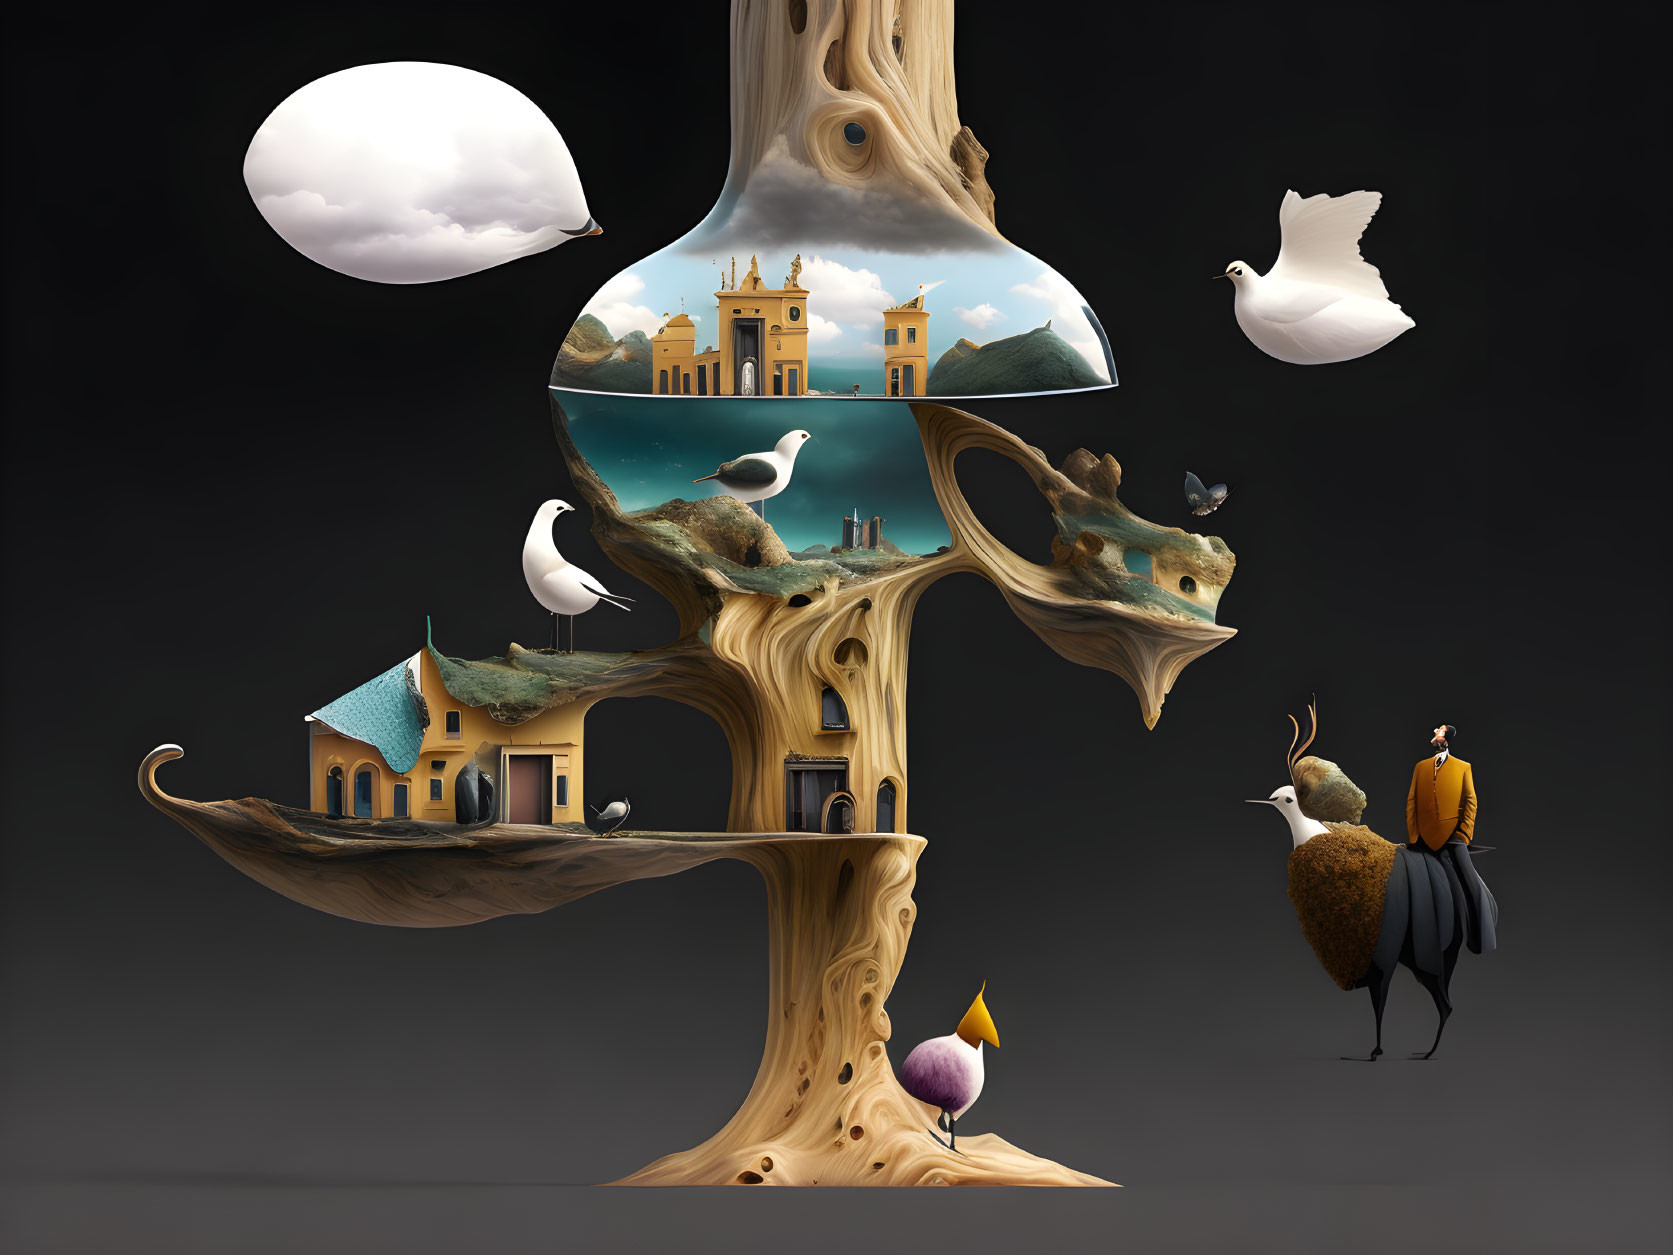 Surreal artwork featuring tree, birds, castle, man with animal head, and creature